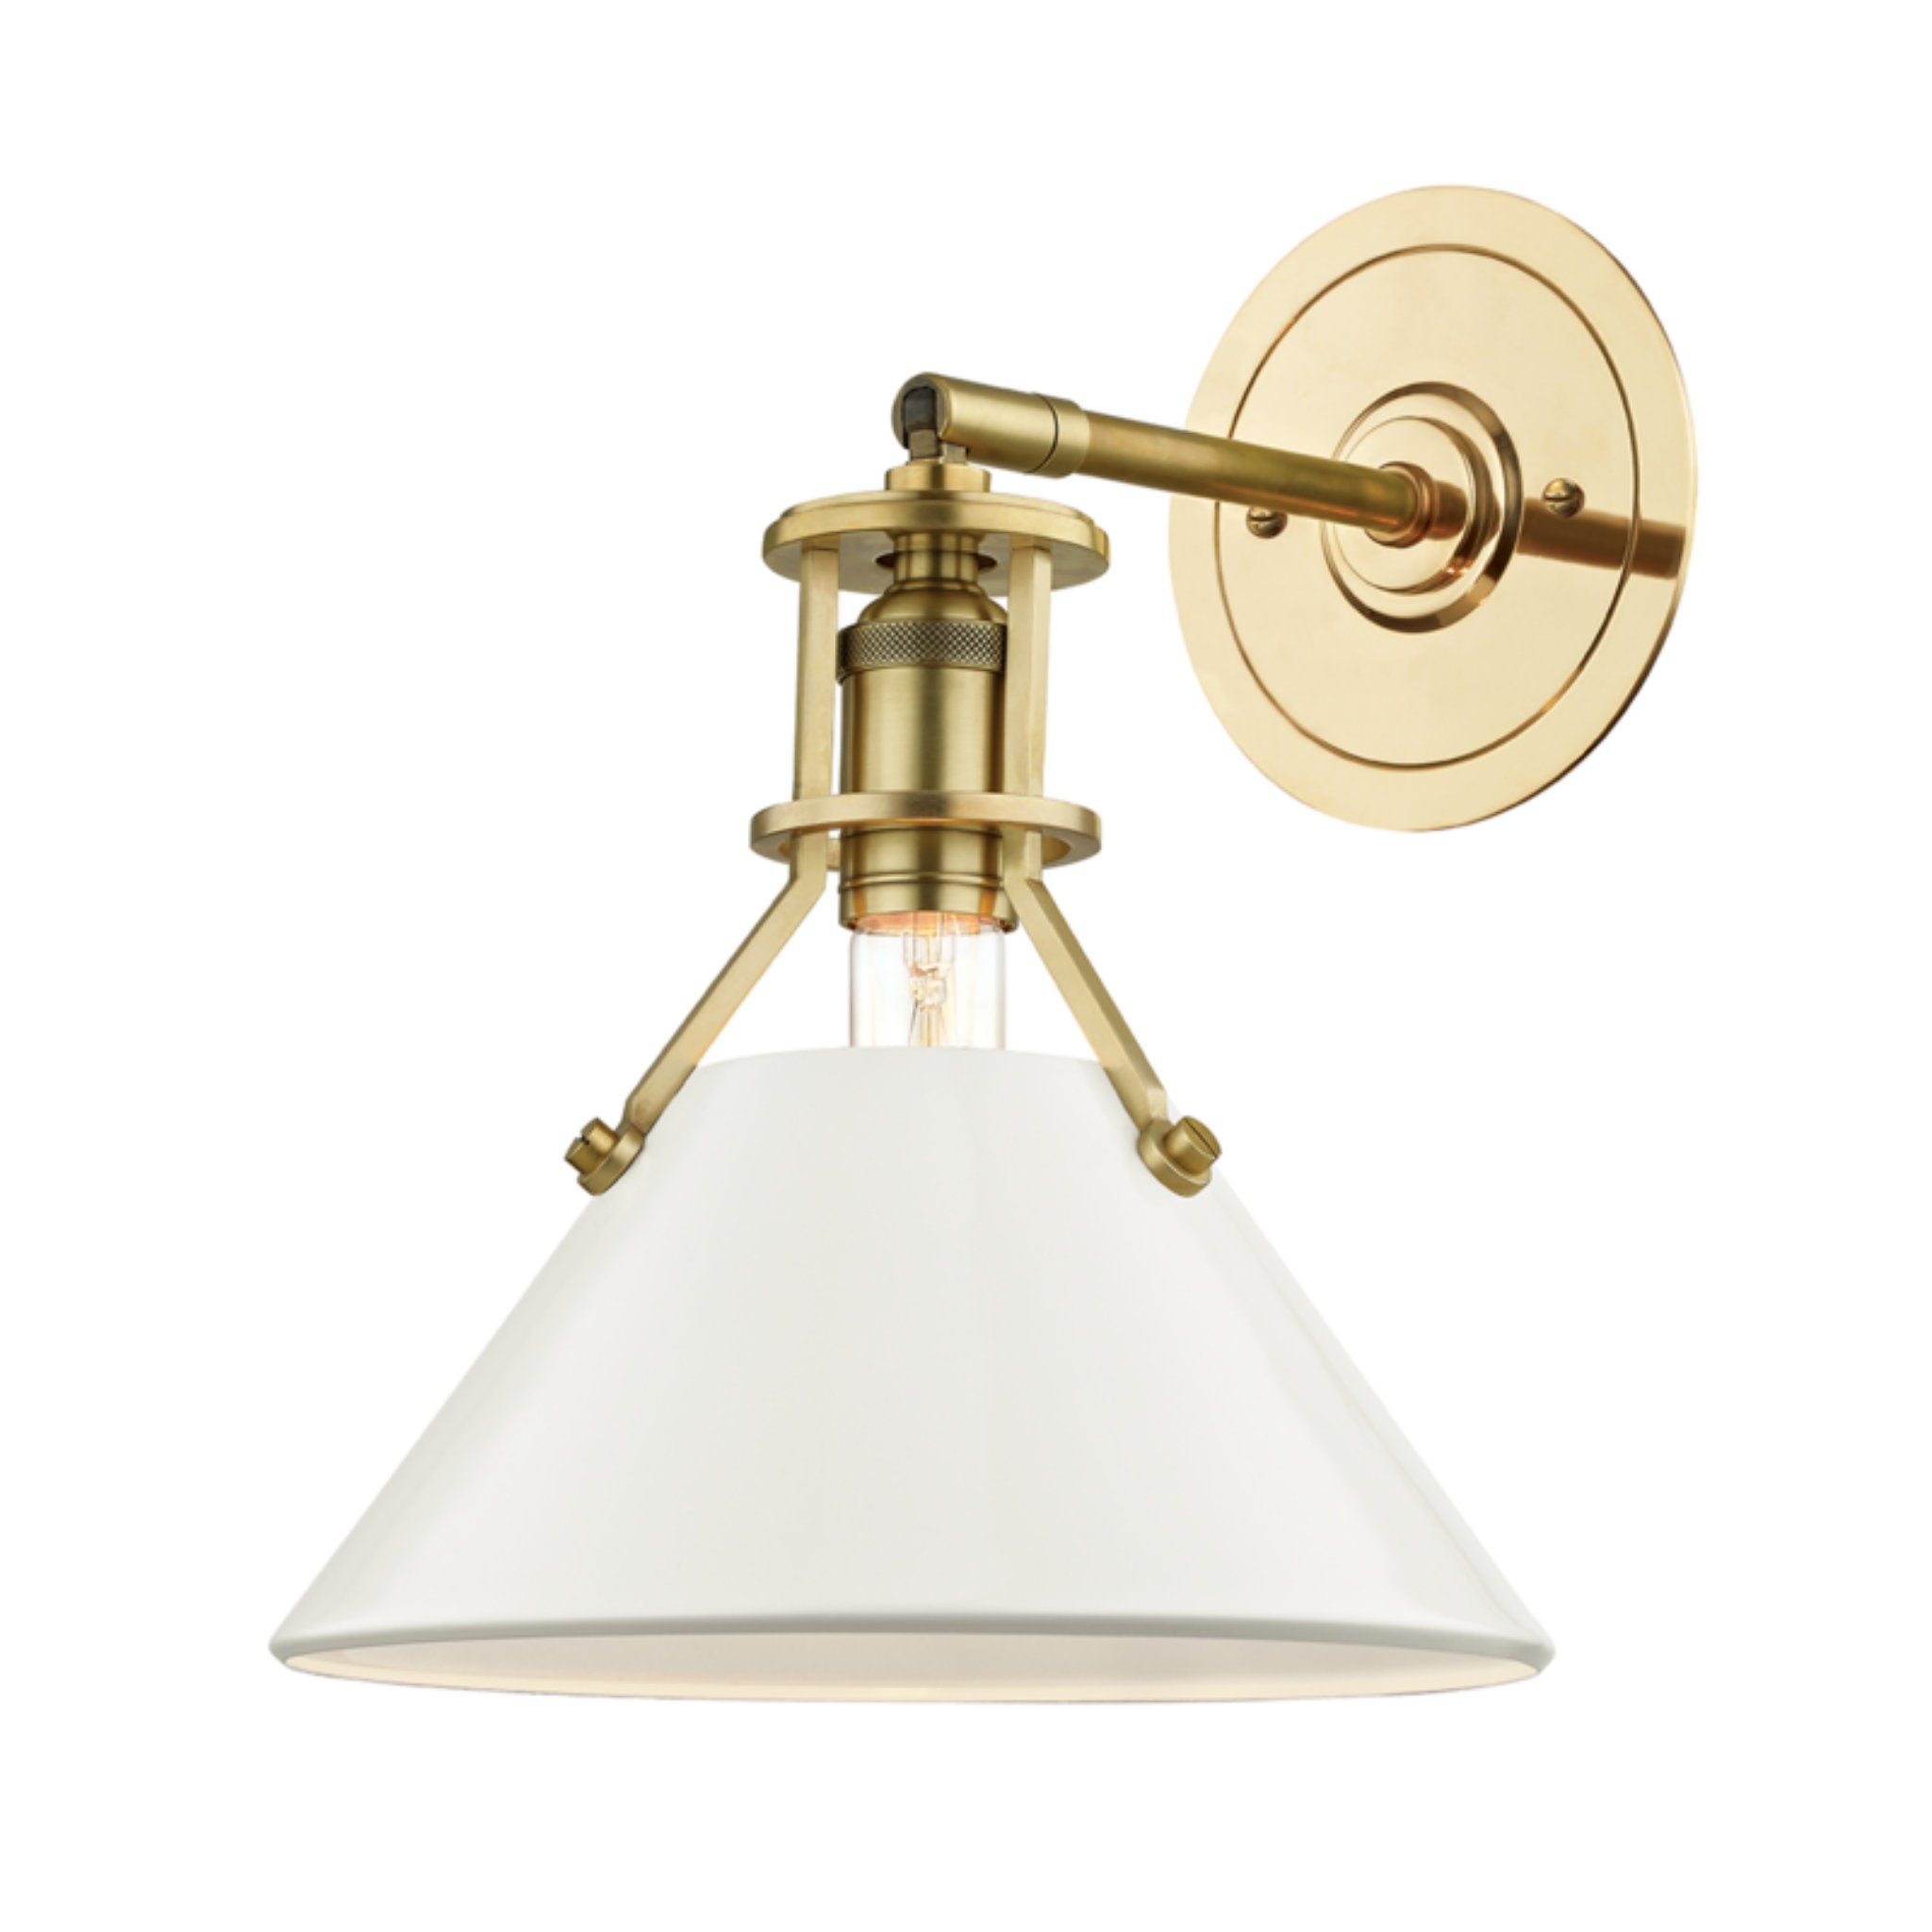 Painted No.2 1 Light Wall Sconce in Aged Brass/off White by Mark D. Si